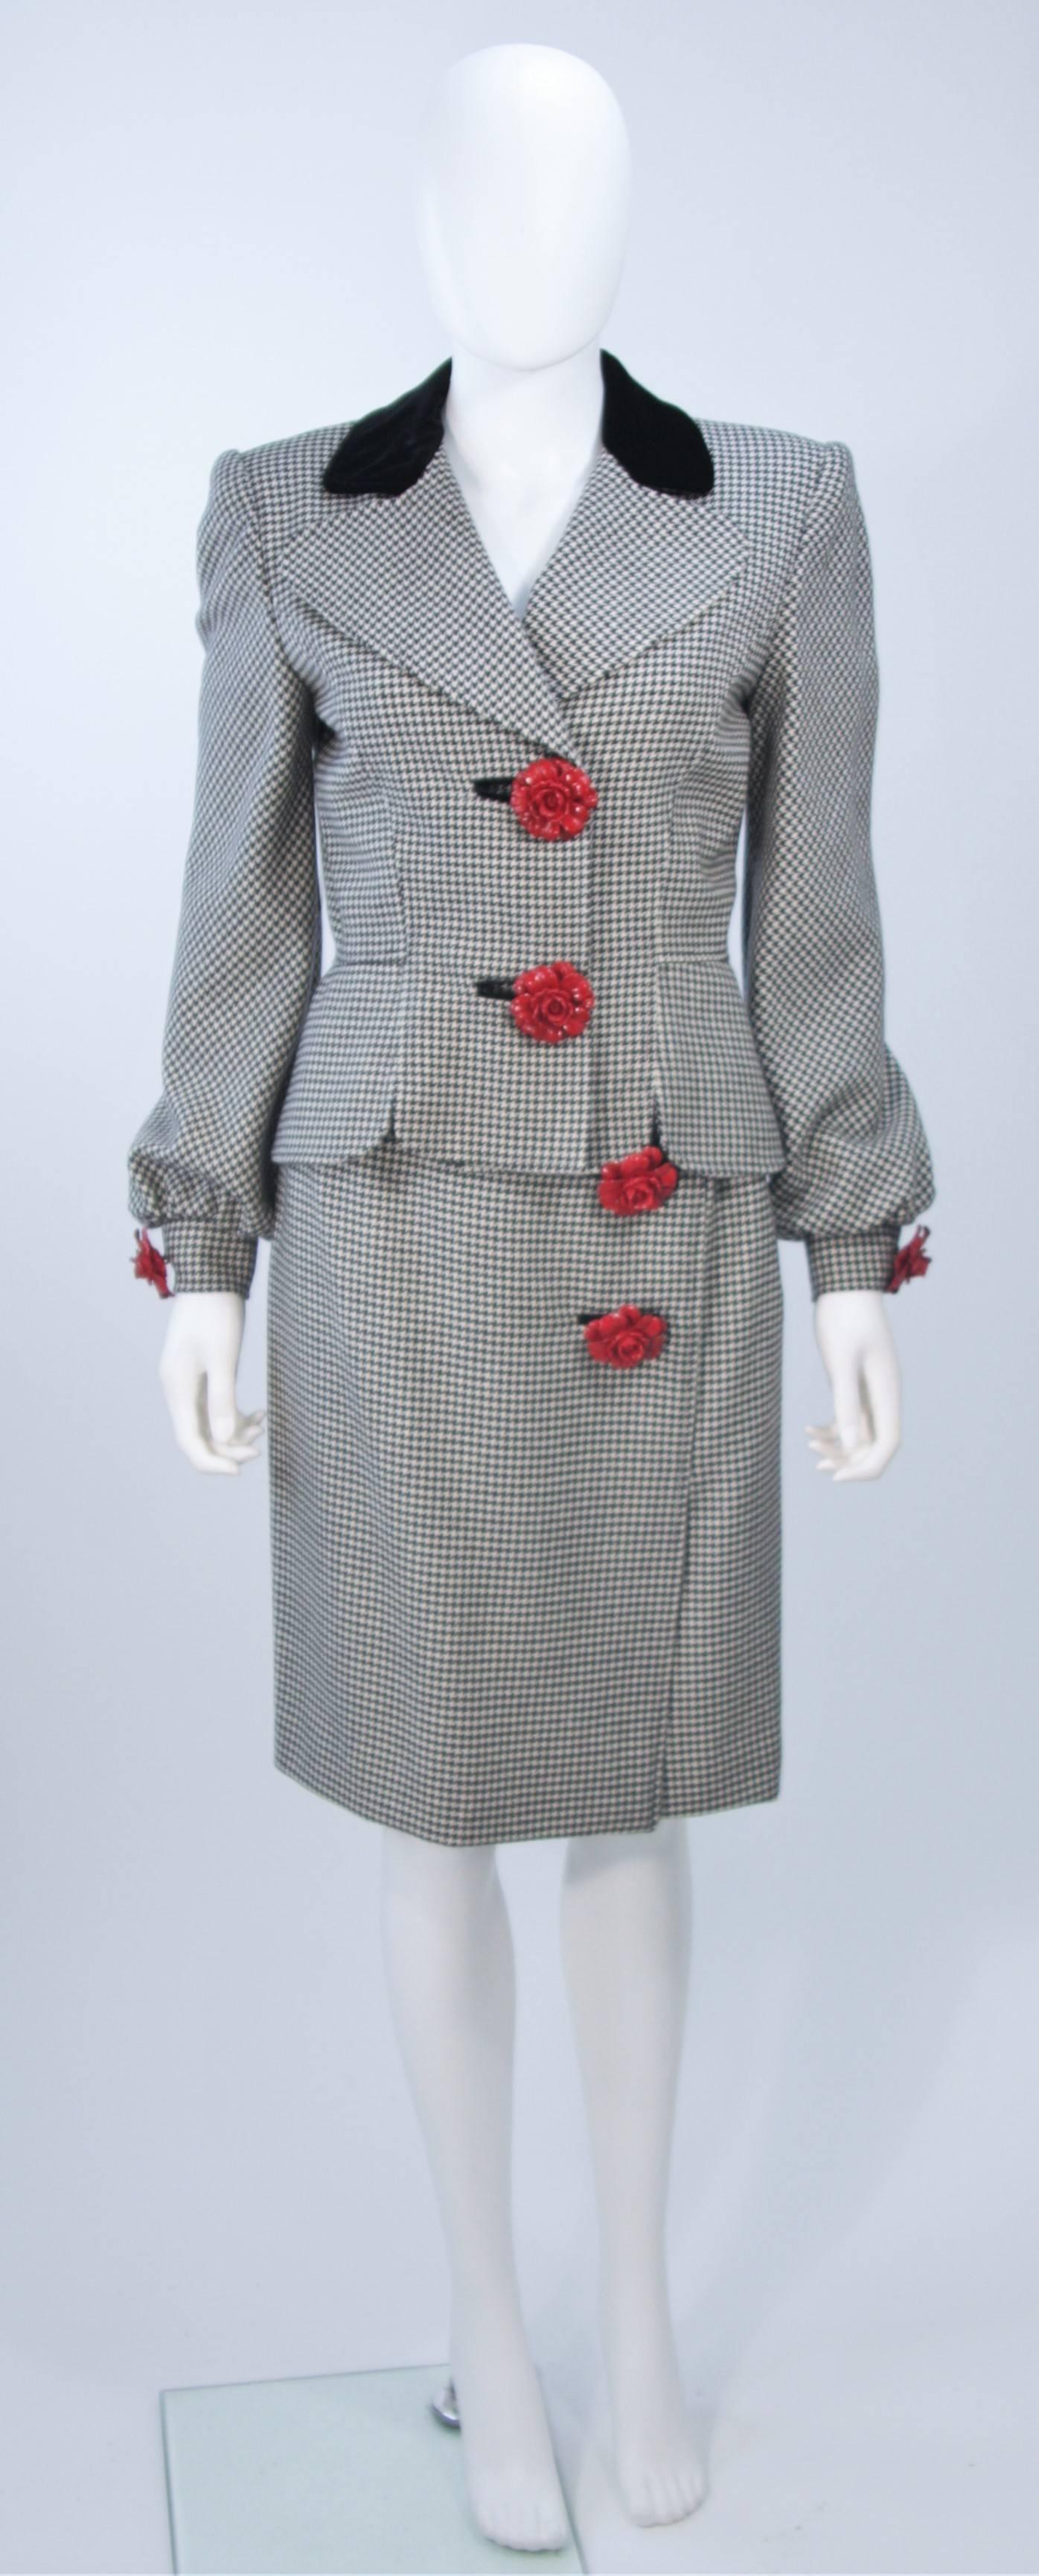  This Valentino skirt suit is composed of a black and white houndstooth print wool and cashmere blend with velvet trim. There are large rose button accents. The jacket features a peplum style and center front closures. The skirt has a pencil style